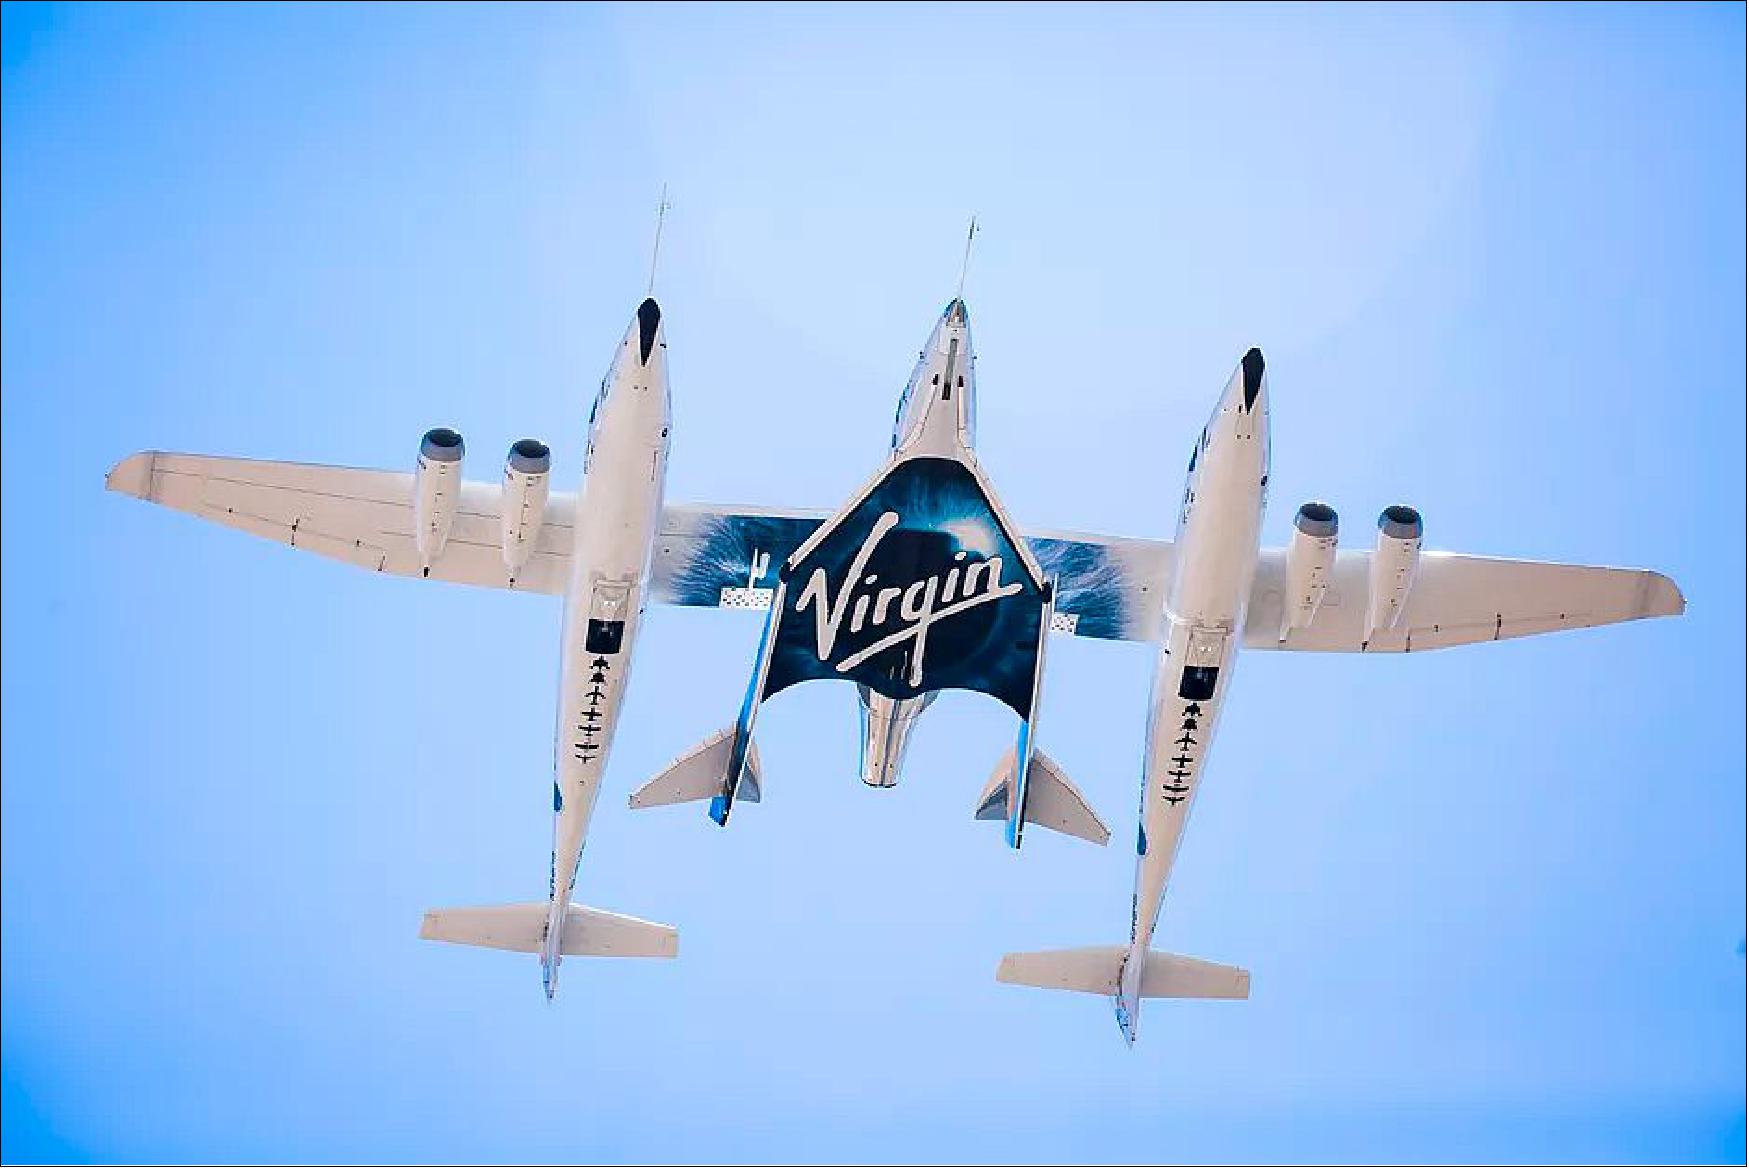 Figure 3: Air-launch configuration of SpaceShip Two (center) being lifted to altitudes of ~ 12 km by the WightKnight Two carrier aircraft prior to release of SpaceShip Two (image credit: Virgin Galactic)